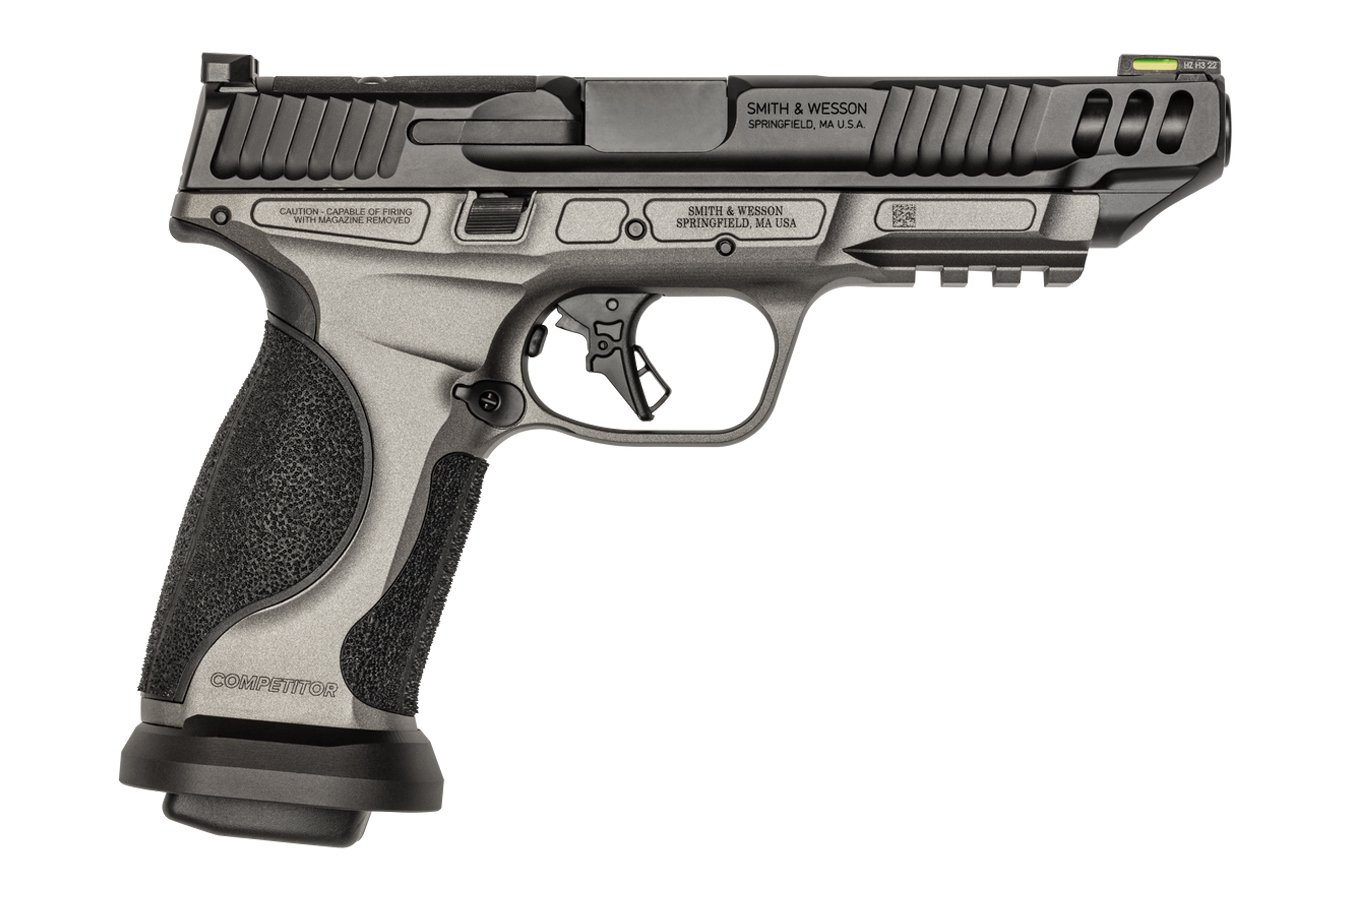 PC MP M2.0 9MM COMPETITOR METAL OPTIC READY 2-TONE